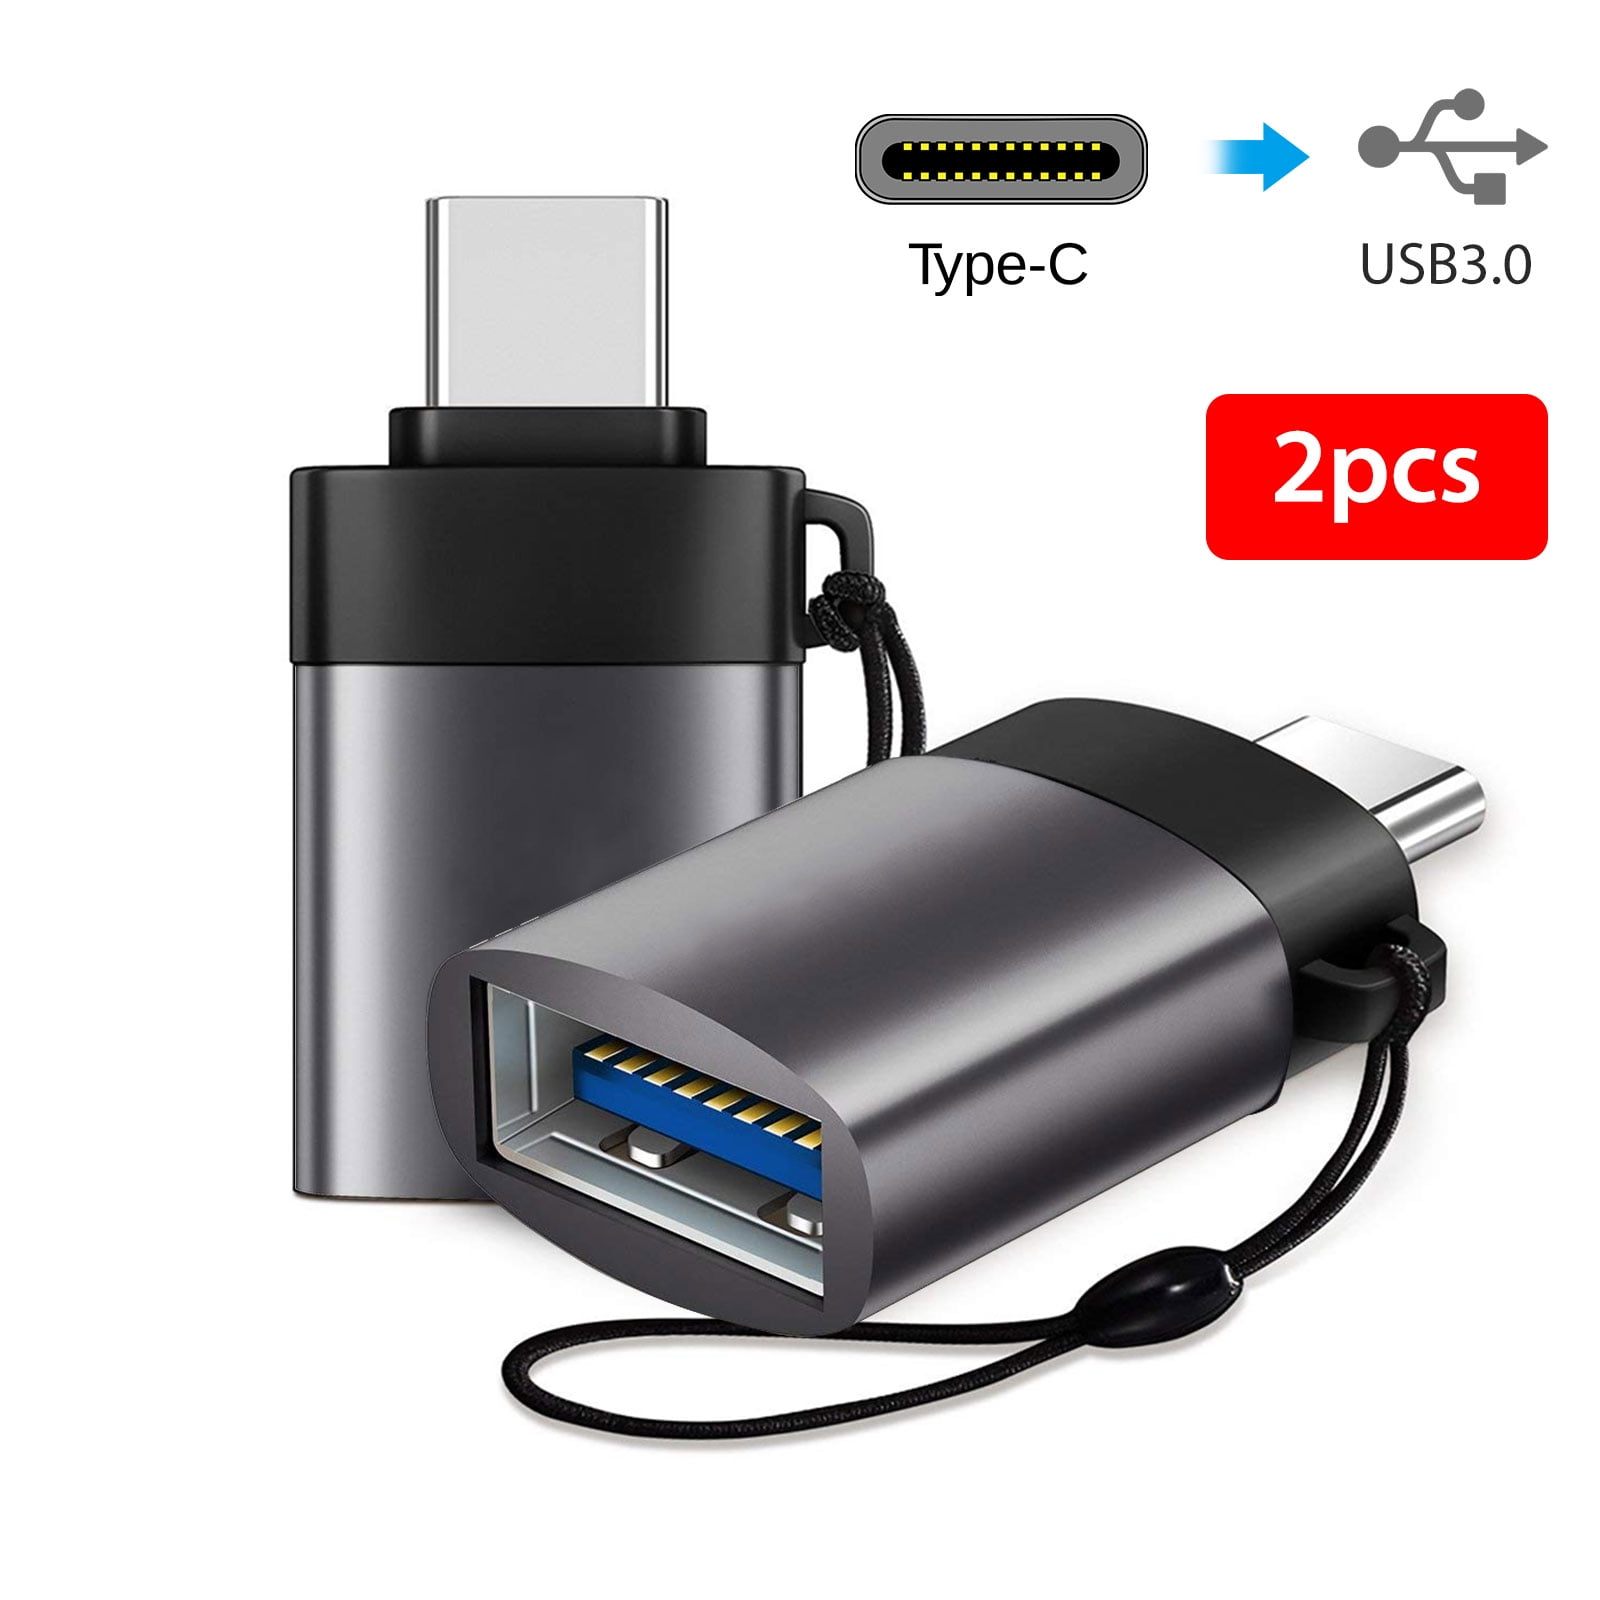 2-pack USB C to A OTG Adapter for Smart Phones Tablet GPS Devices - Walmart.com